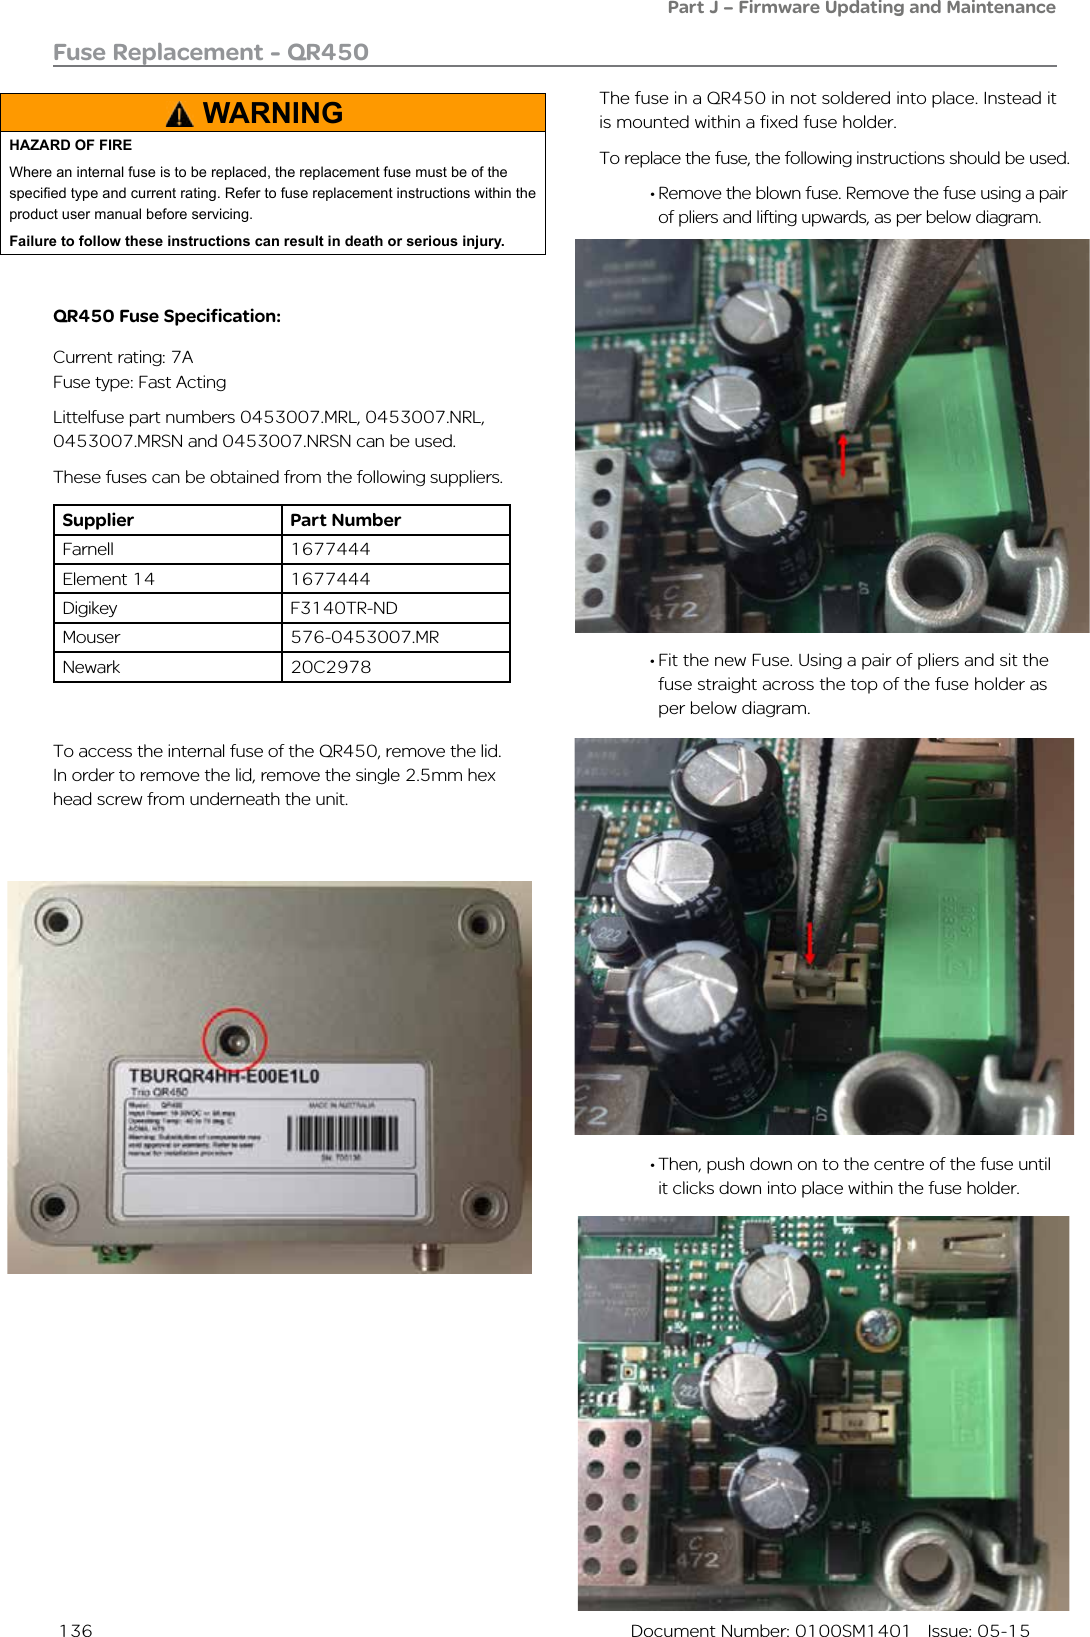  136  Document Number: 0100SM1401   Issue: 05-15Fuse Replacement - QR450• Fit the new Fuse. Using a pair of pliers and sit the fuse straight across the top of the fuse holder as per below diagram. To access the internal fuse of the QR450, remove the lid. In order to remove the lid, remove the single 2.5mm hex head screw from underneath the unit. The fuse in a QR450 in not soldered into place. Instead it is mounted within a fixed fuse holder.To replace the fuse, the following instructions should be used.• Remove the blown fuse. Remove the fuse using a pair of pliers and lifting upwards, as per below diagram.• Then, push down on to the centre of the fuse until it clicks down into place within the fuse holder.Part J – Firmware Updating and MaintenanceQR450 Fuse Specification:Current rating: 7AFuse type: Fast ActingLittelfuse part numbers 0453007.MRL, 0453007.NRL, 0453007.MRSN and 0453007.NRSN can be used. These fuses can be obtained from the following suppliers.Supplier Part NumberFarnell 1677444Element 14 1677444Digikey F3140TR-NDMouser 576-0453007.MRNewark  20C2978WARNINGHAZARD OF FIREWhere an internal fuse is to be replaced, the replacement fuse must be of the specied type and current rating. Refer to fuse replacement instructions within the product user manual before servicing.Failure to follow these instructions can result in death or serious injury.